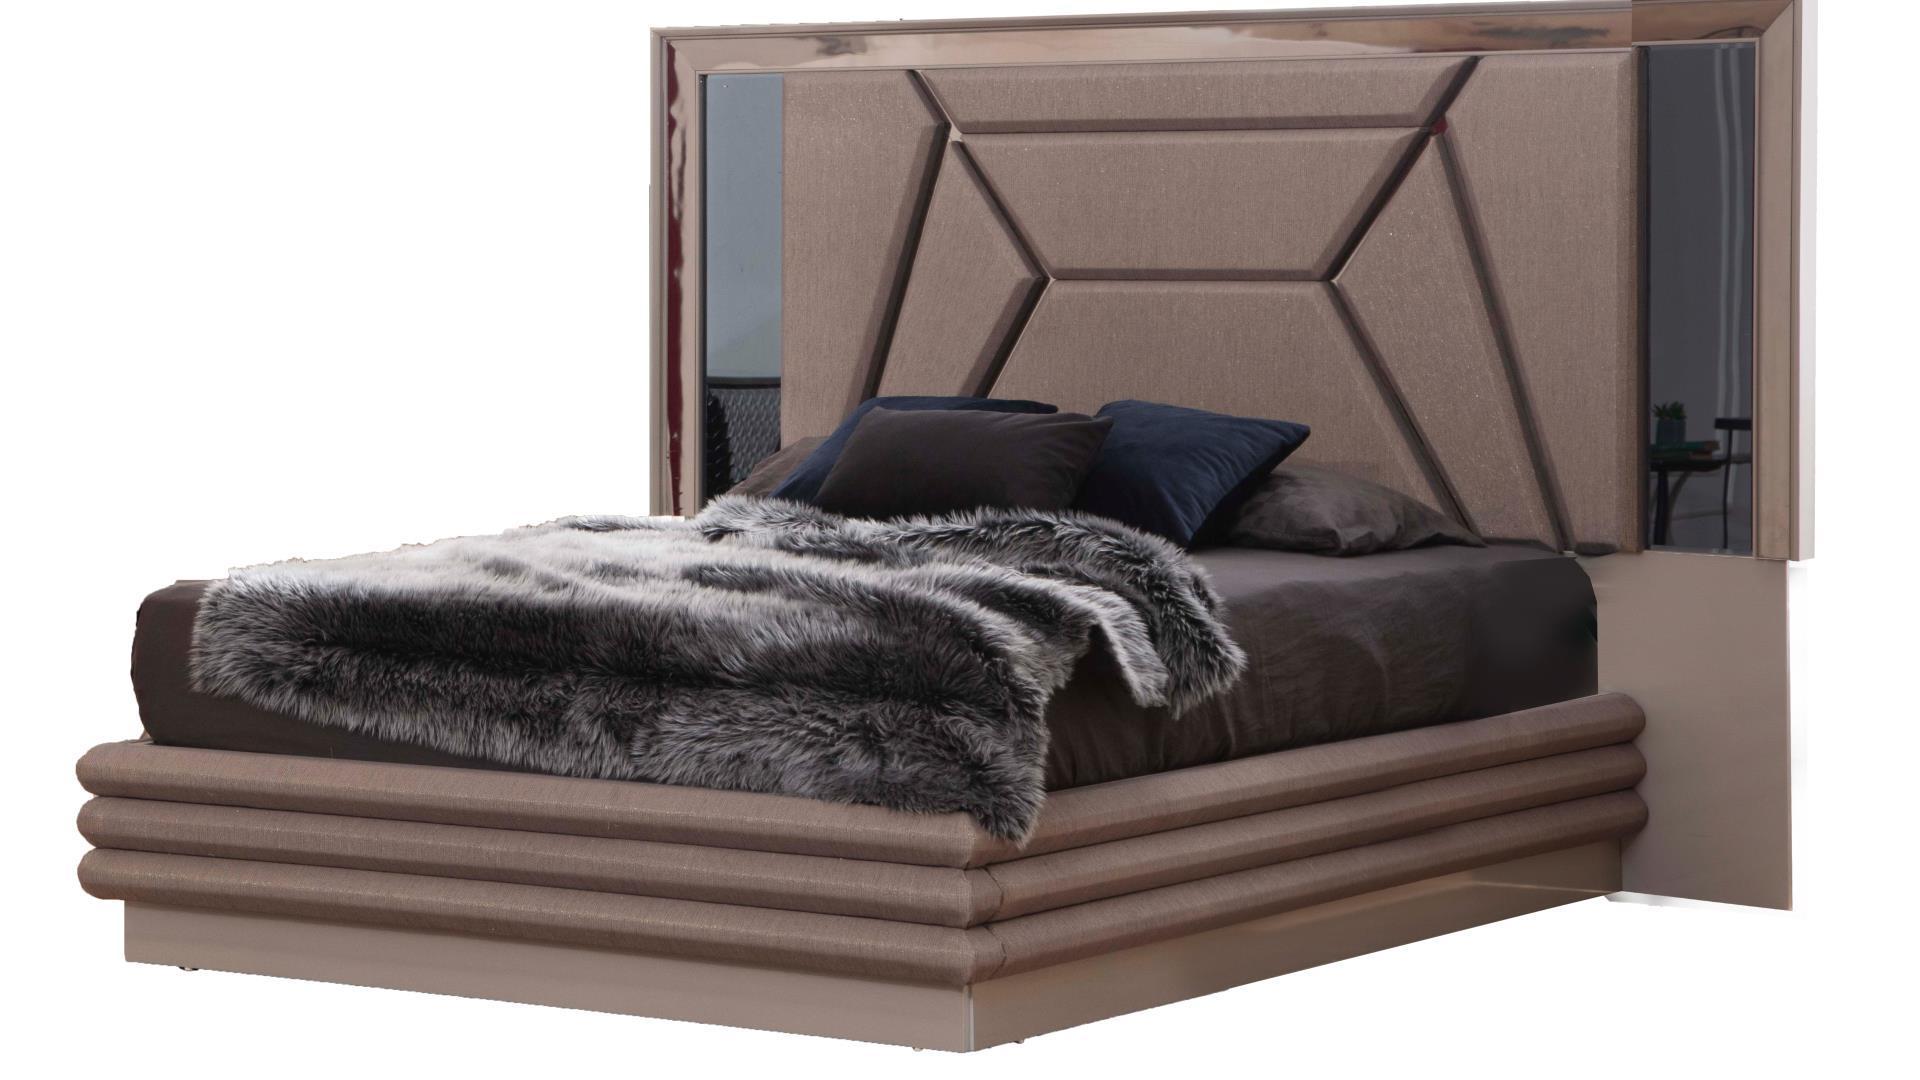 Contemporary, Modern Platform Bed WENDY WENDY-Q in Taupe Fabric